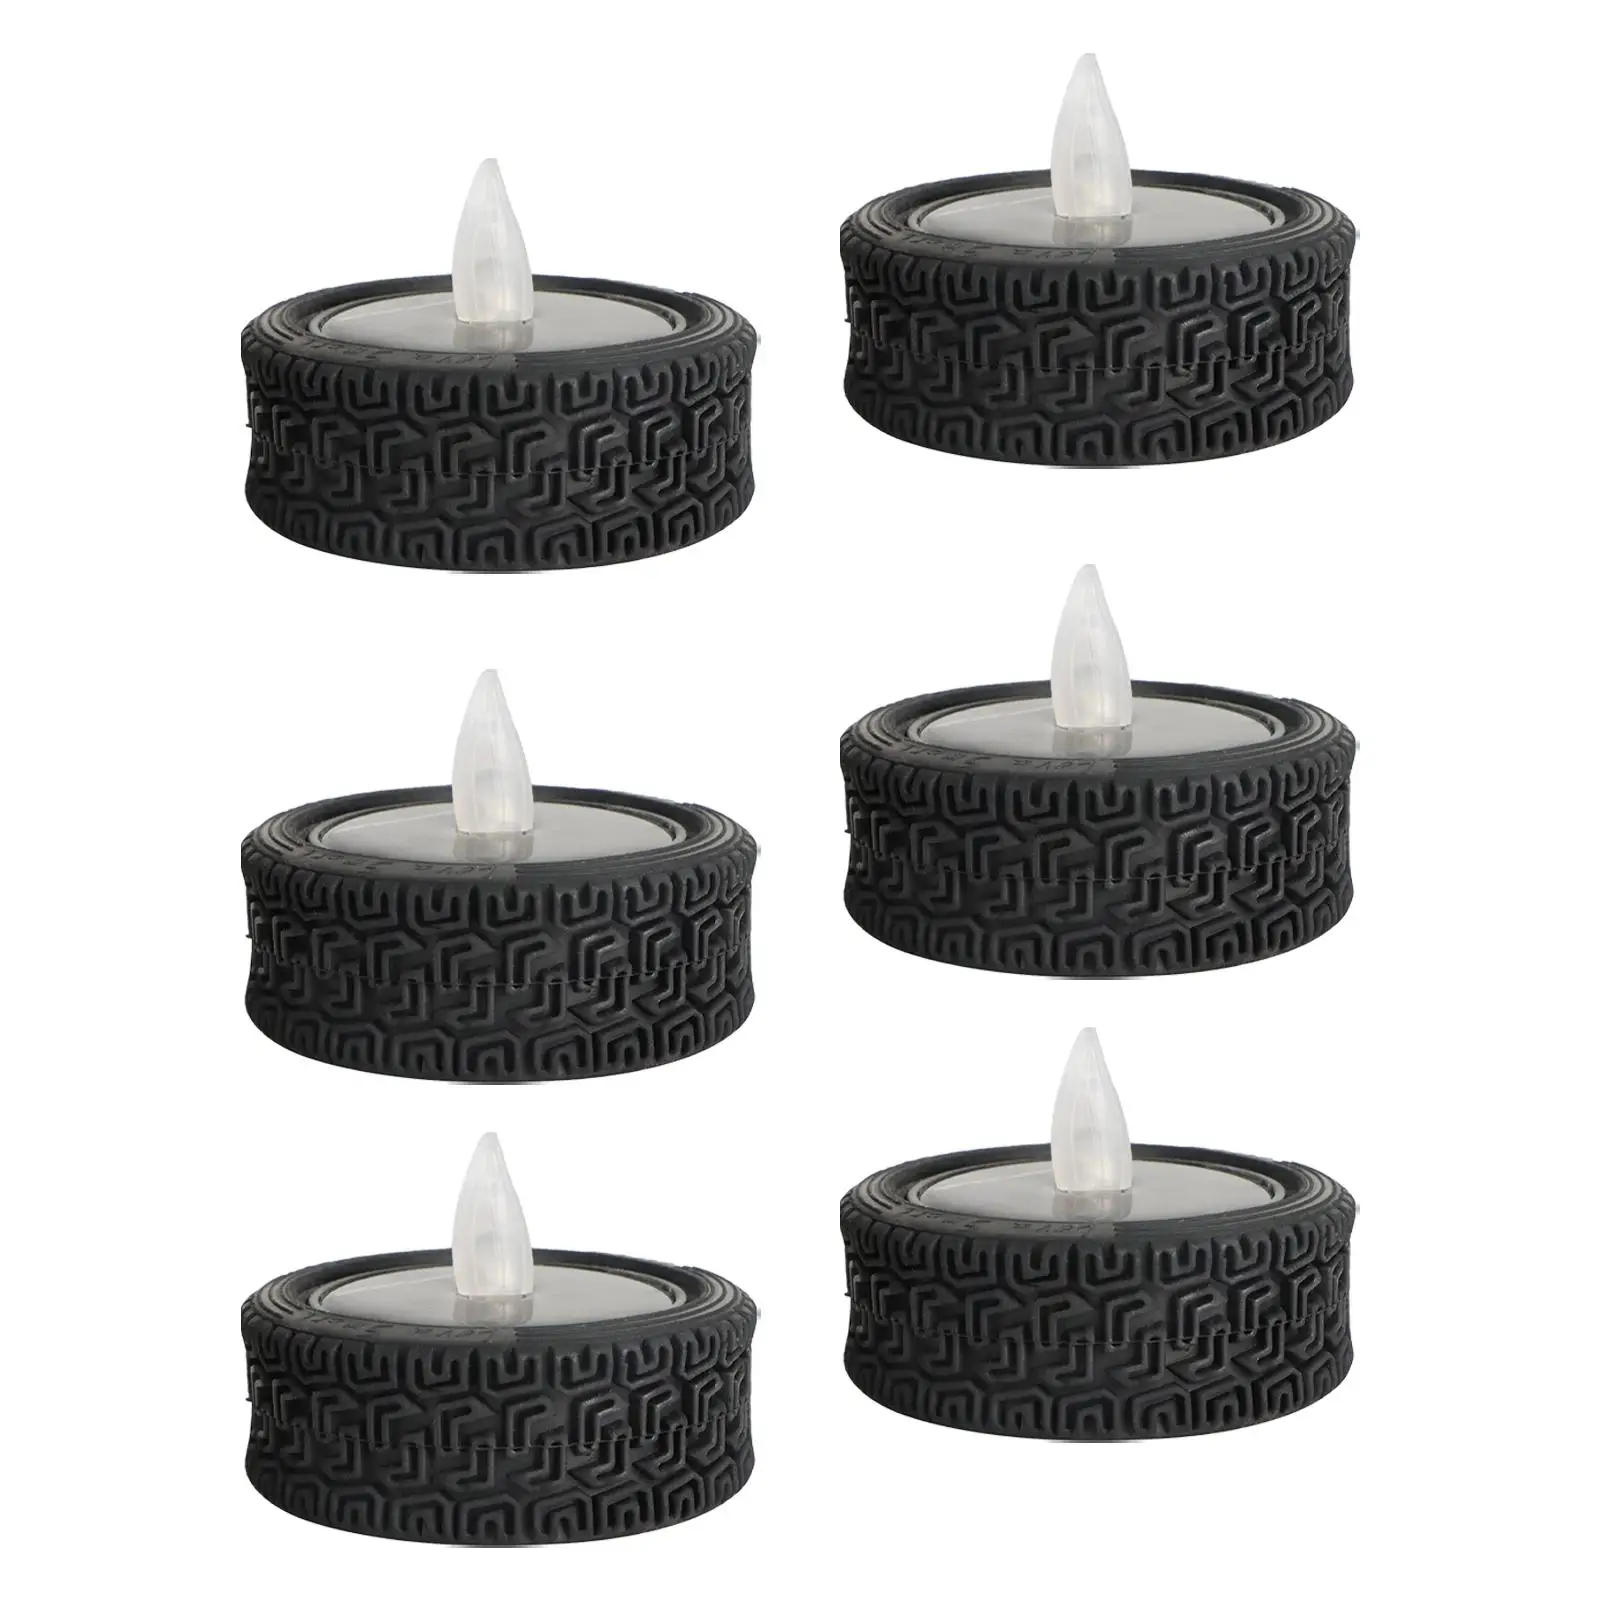 6Pcs LED Solar Candles Lantern Flickering Nightlight Flameless Tea Light Candle for Pathway Yard Camping Centerpiece